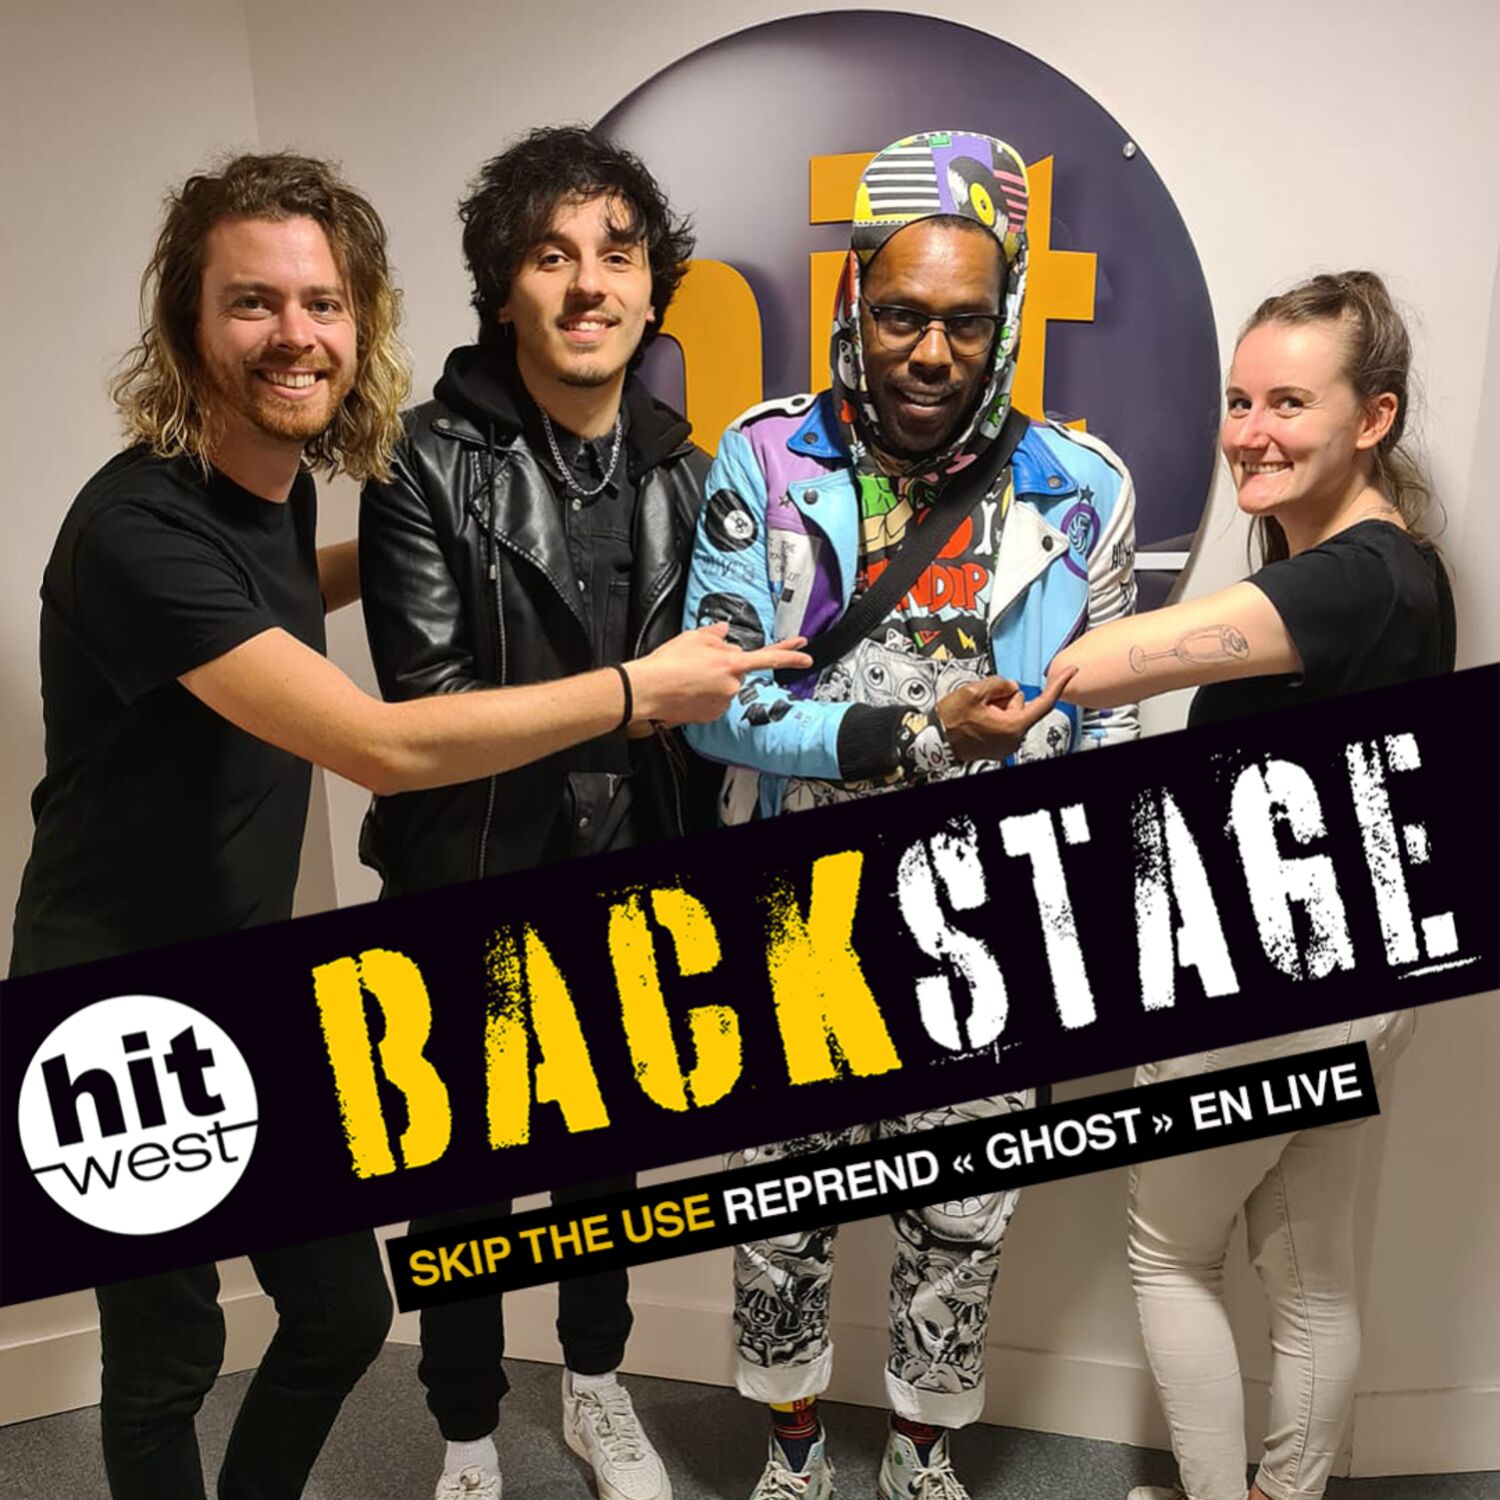 Skip The Use reprend " Ghost " dans Backstage